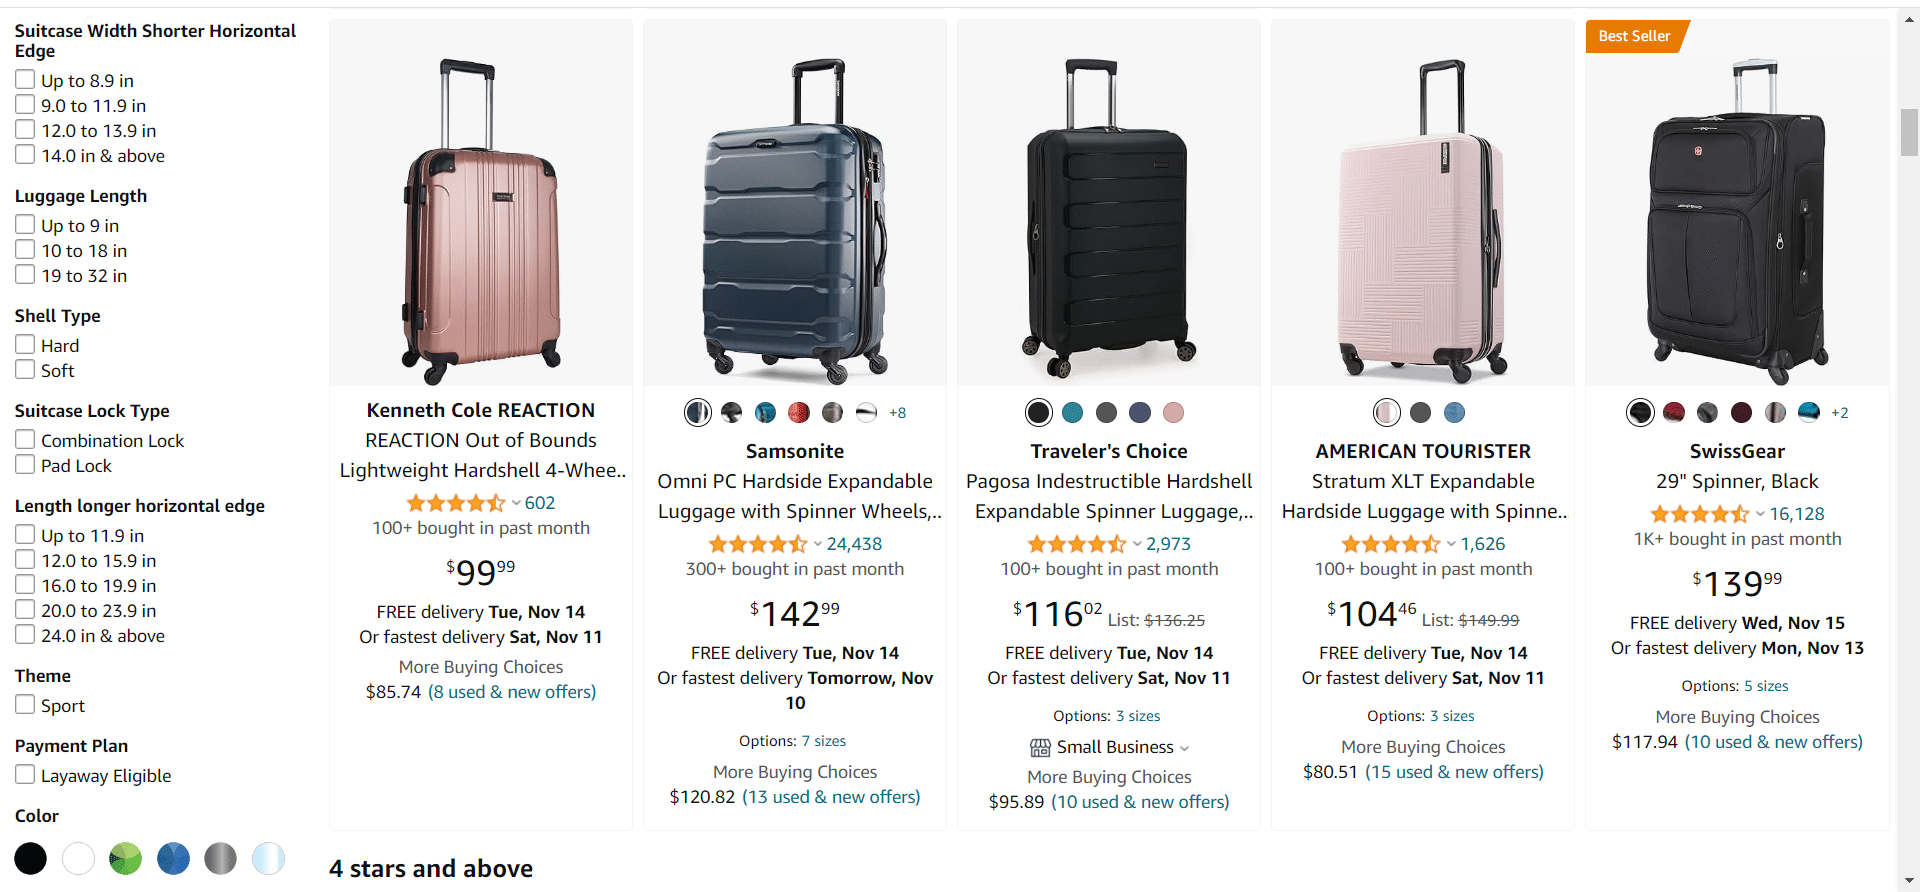 Alternative products based that you might also consider when shopping for a 24" suitcase on Amazon.